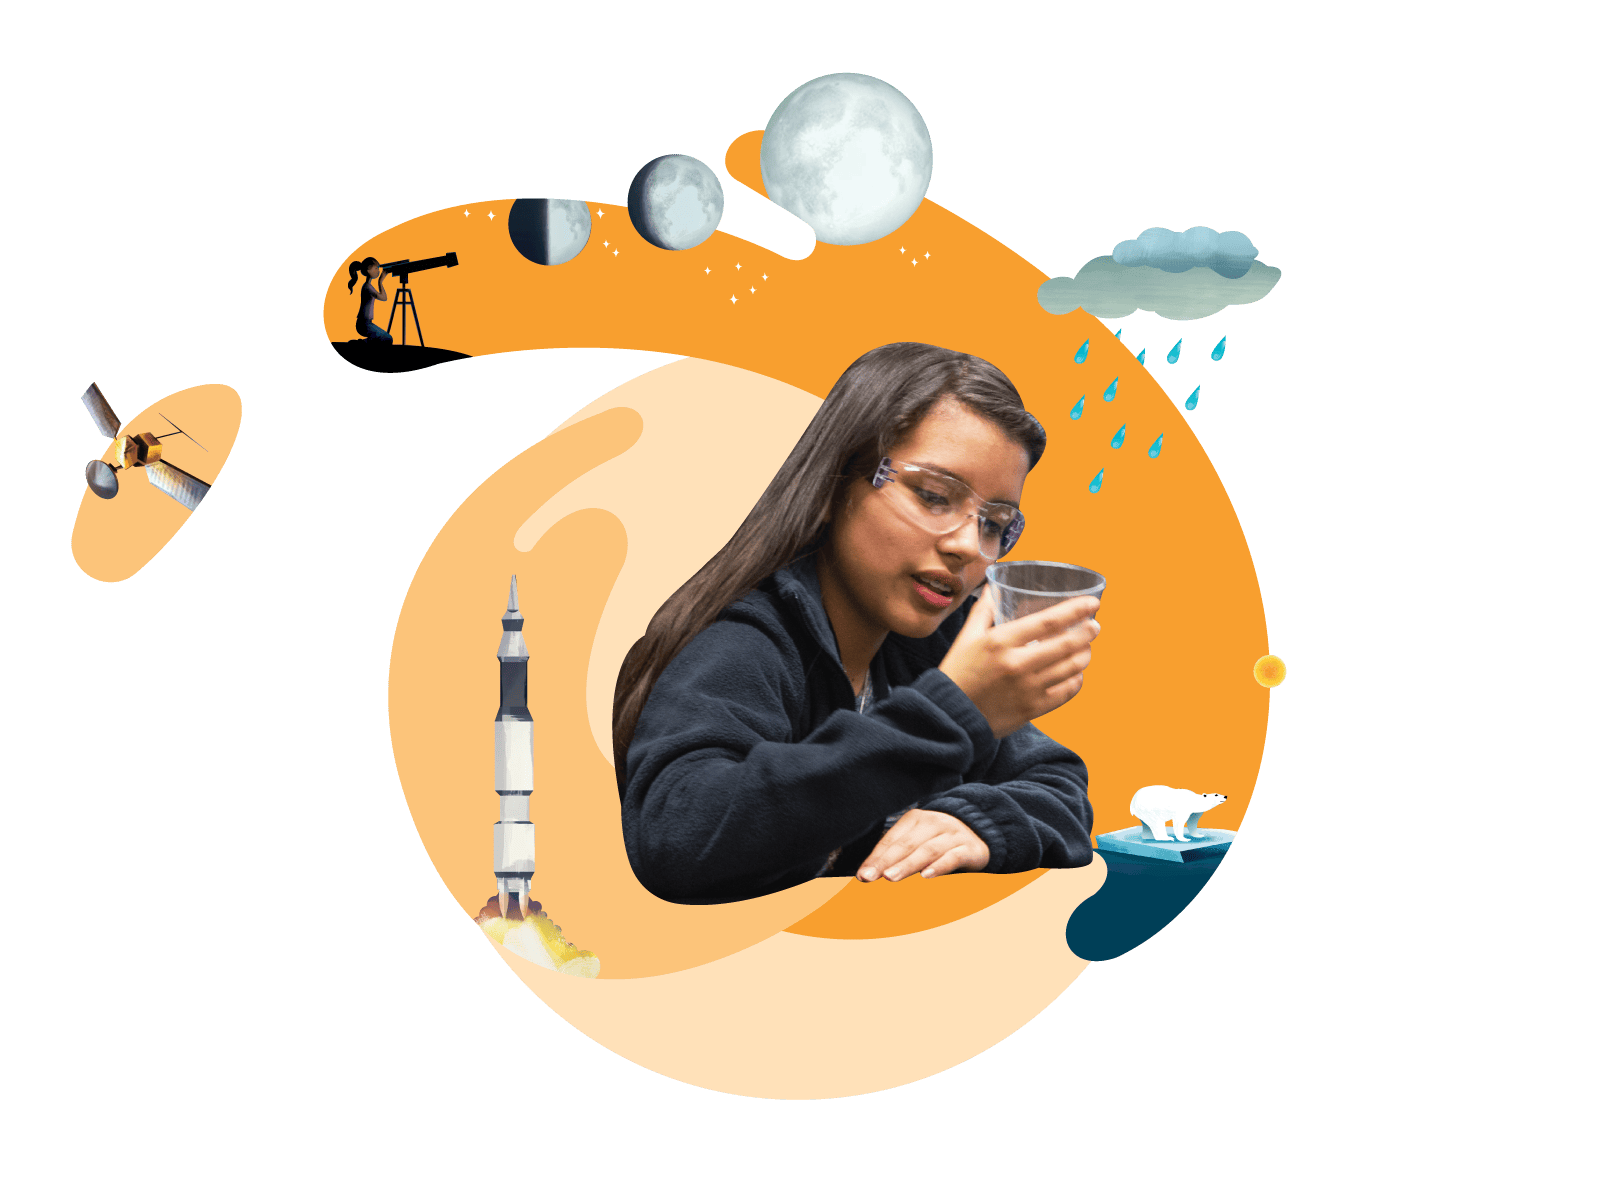 A woman in glasses examining a glass of water, surrounded by illustrations of scientific icons like satellites, a rocket, a telescope, moons, and clouds on an abstract orange and black background.